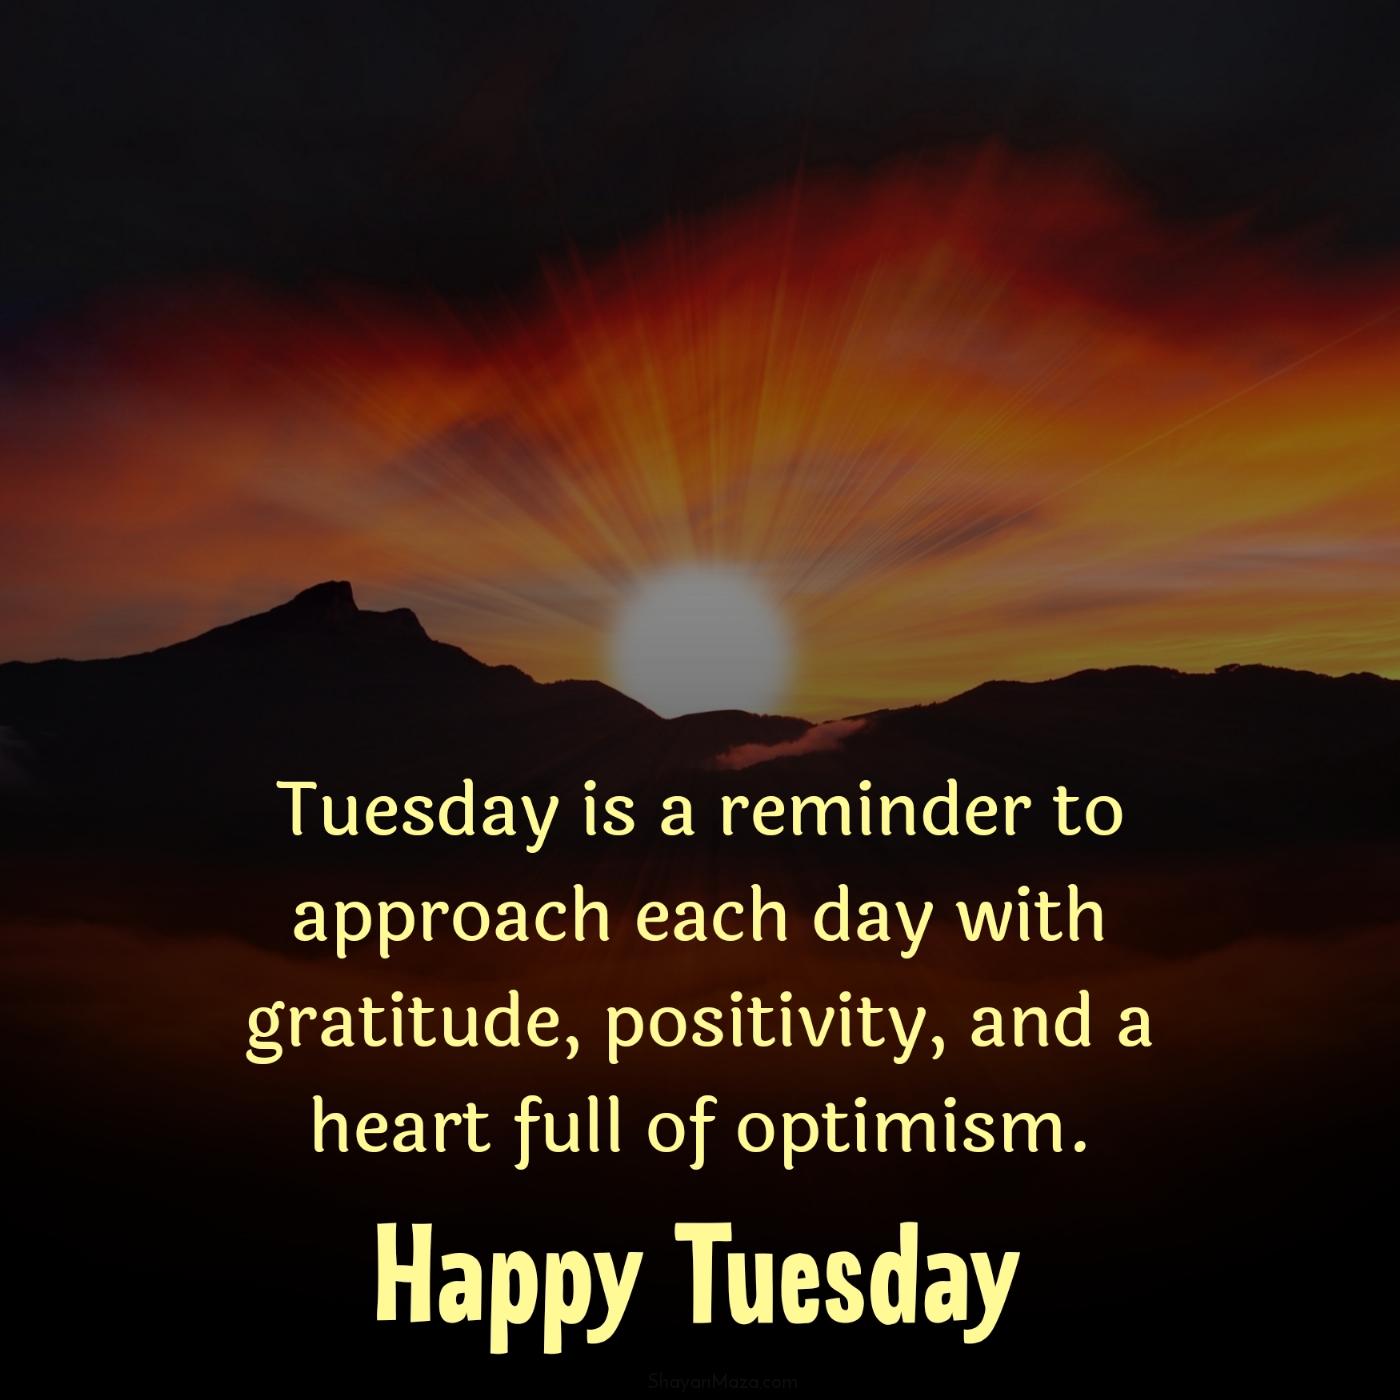 Tuesday is a reminder to approach each day with gratitude